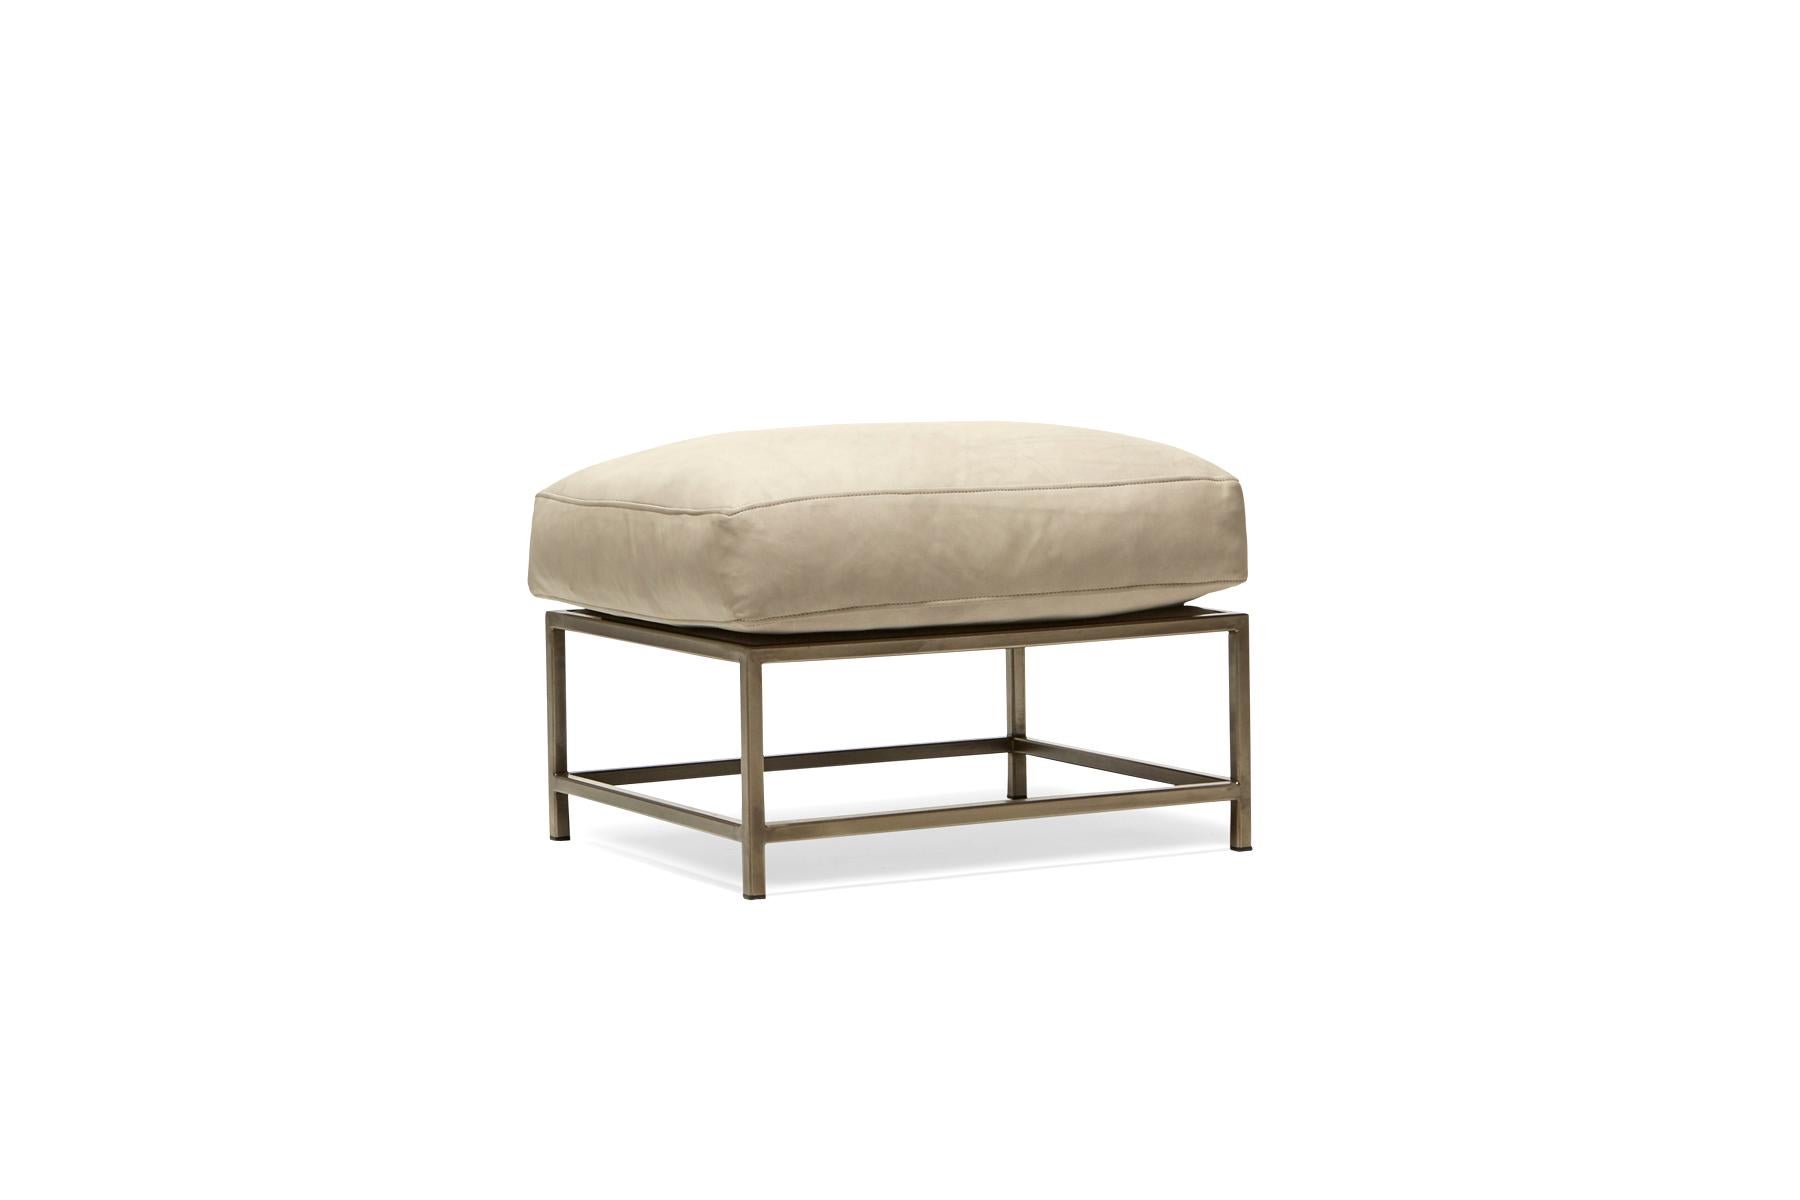 Designed to pair with any of the inheritance seating options, the ottoman is a great addition to add a lounge element to your seating arrangement. 

This variation is upholstered in a light stone leather by Moore & Giles. The foam seat cushions